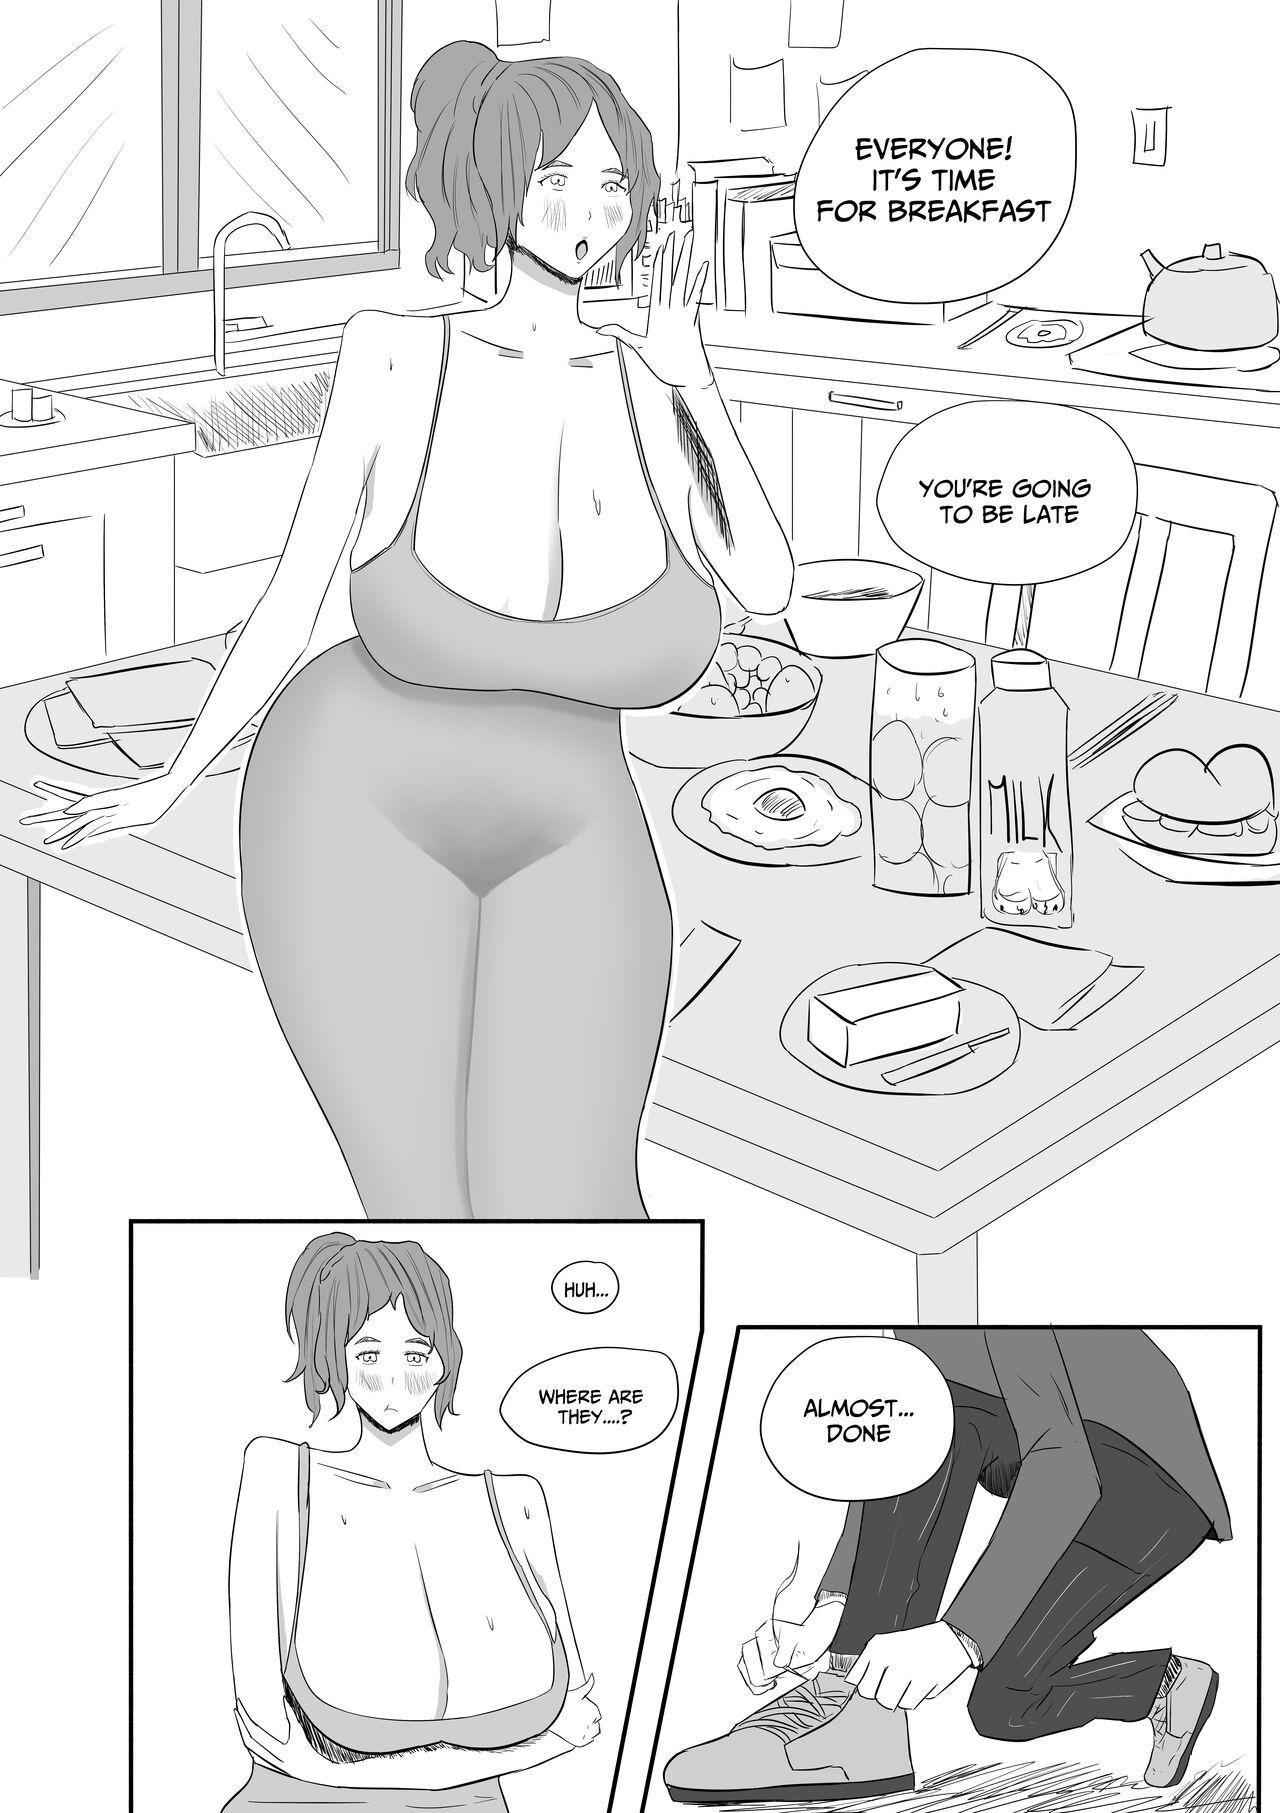 Babysitter Mom and Brother 2.1 ongoing Deutsch - Page 1